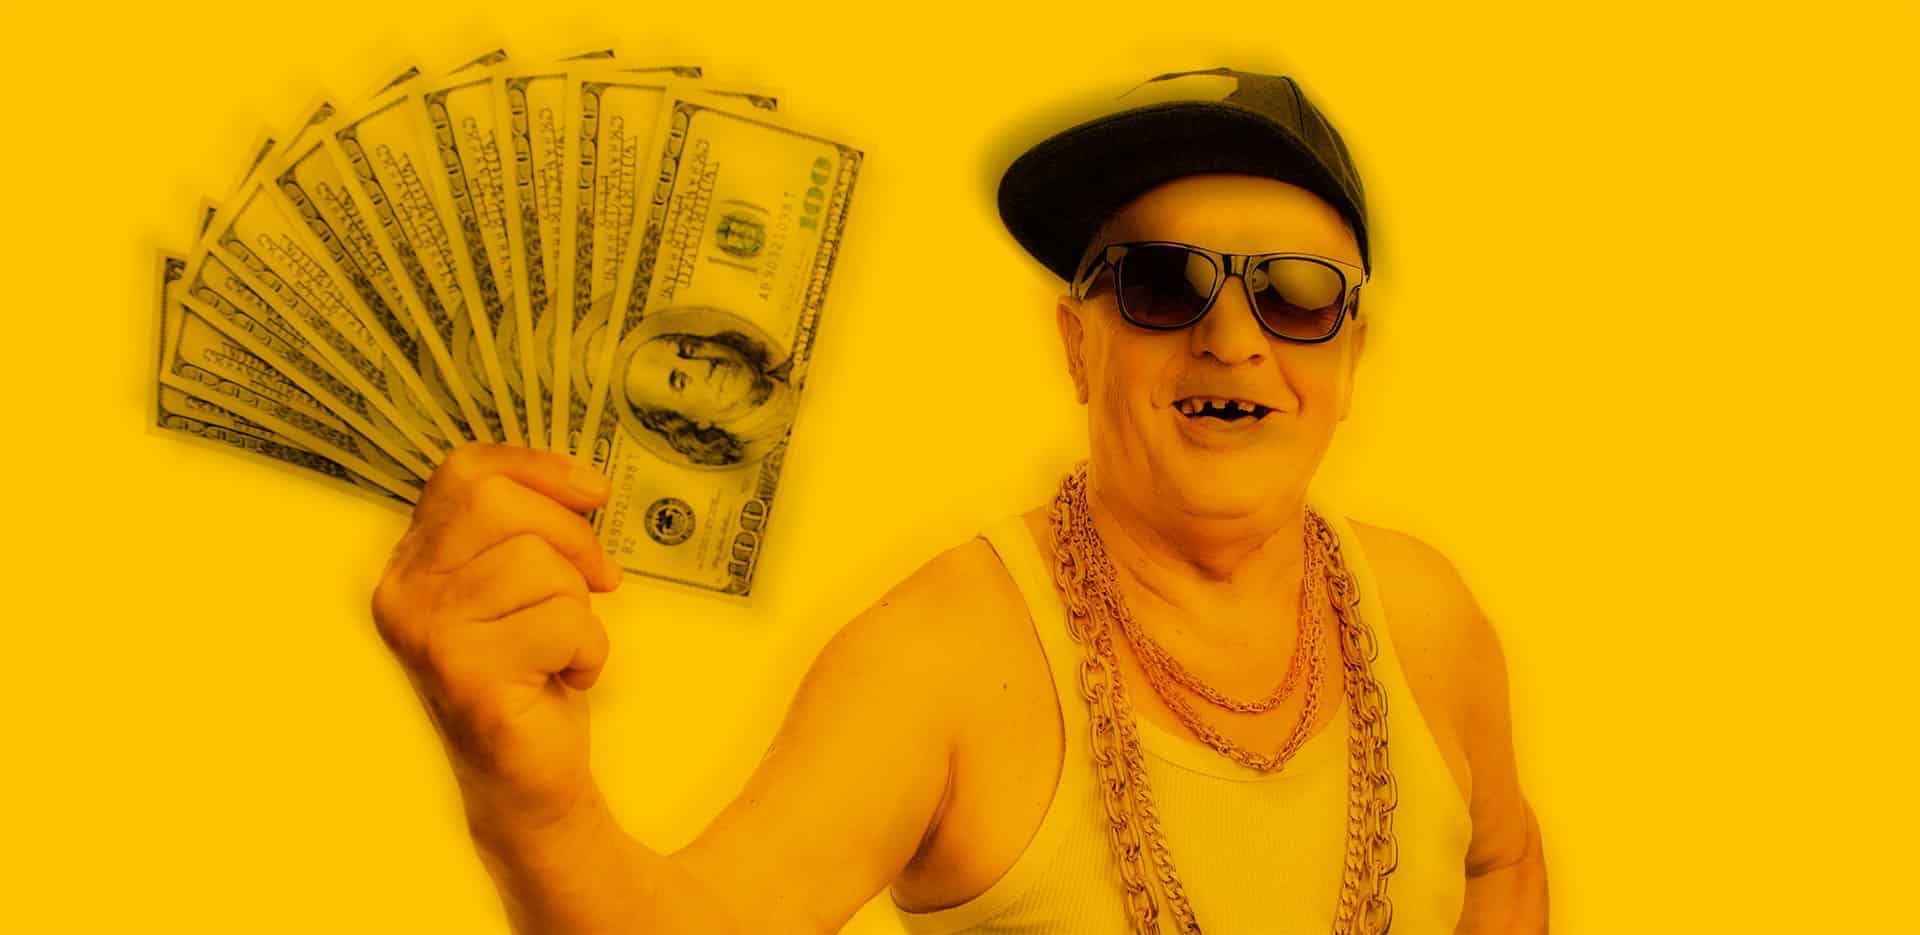 toothless old man in hip hop outfit holding cash